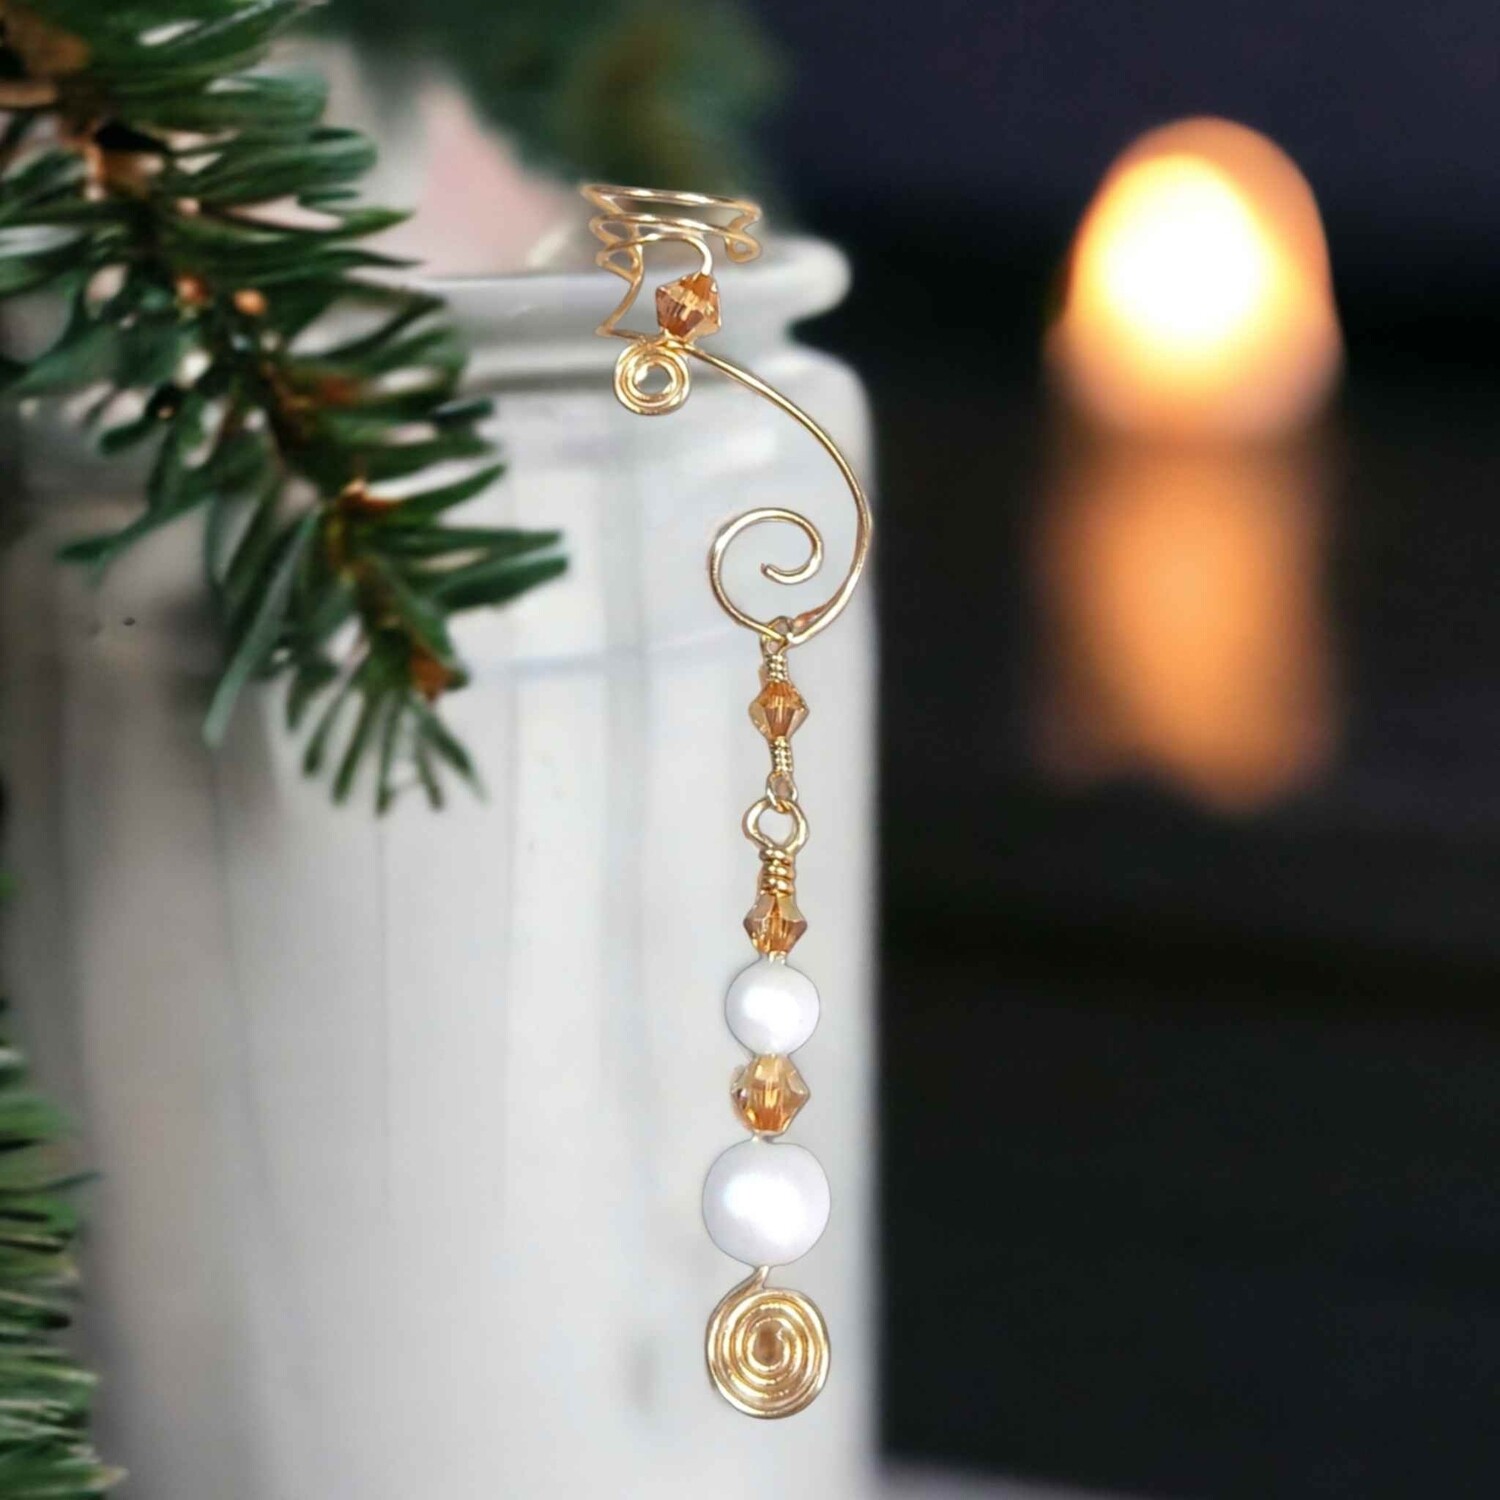 Dangle Ear Cuff 2 in 1 Golden Crystal with Aurora Pearls, No Piercing